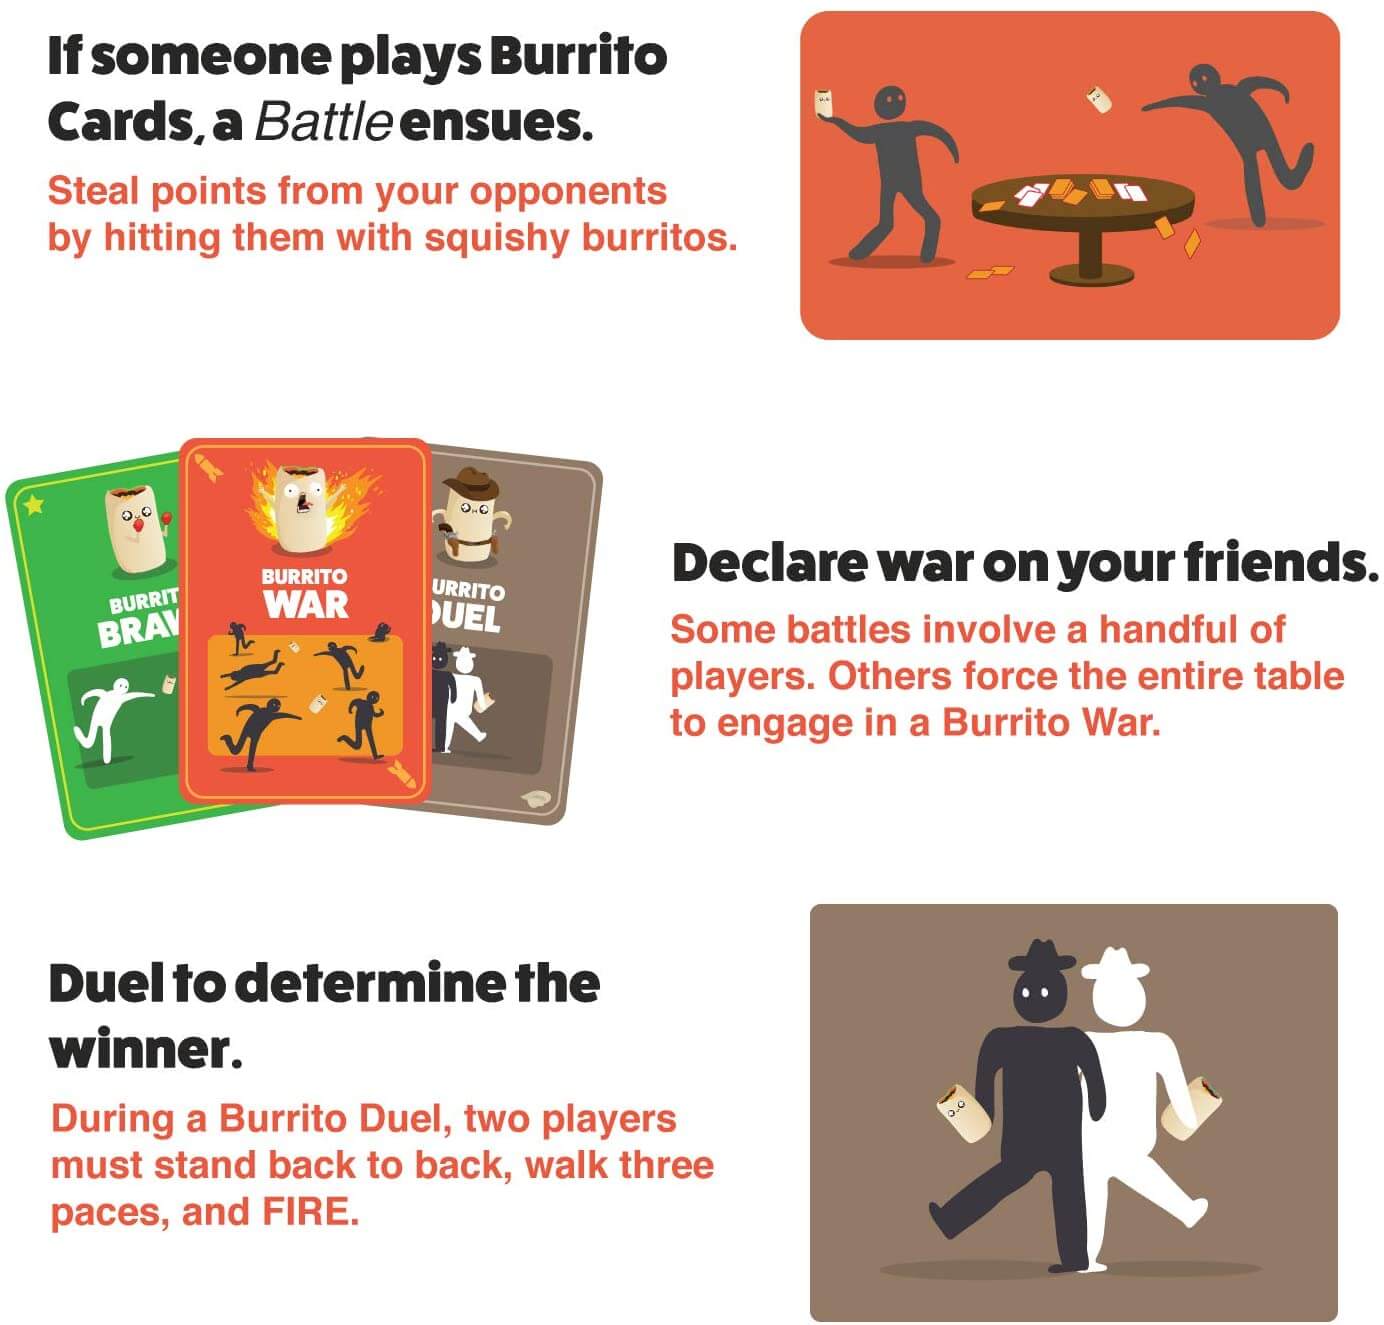 Throw Throw Burrito by Exploding Kittens - A Dodgeball Card Game -  Family-Friendly Party Games - for Adults, Teens & Kids - 2-6 Players